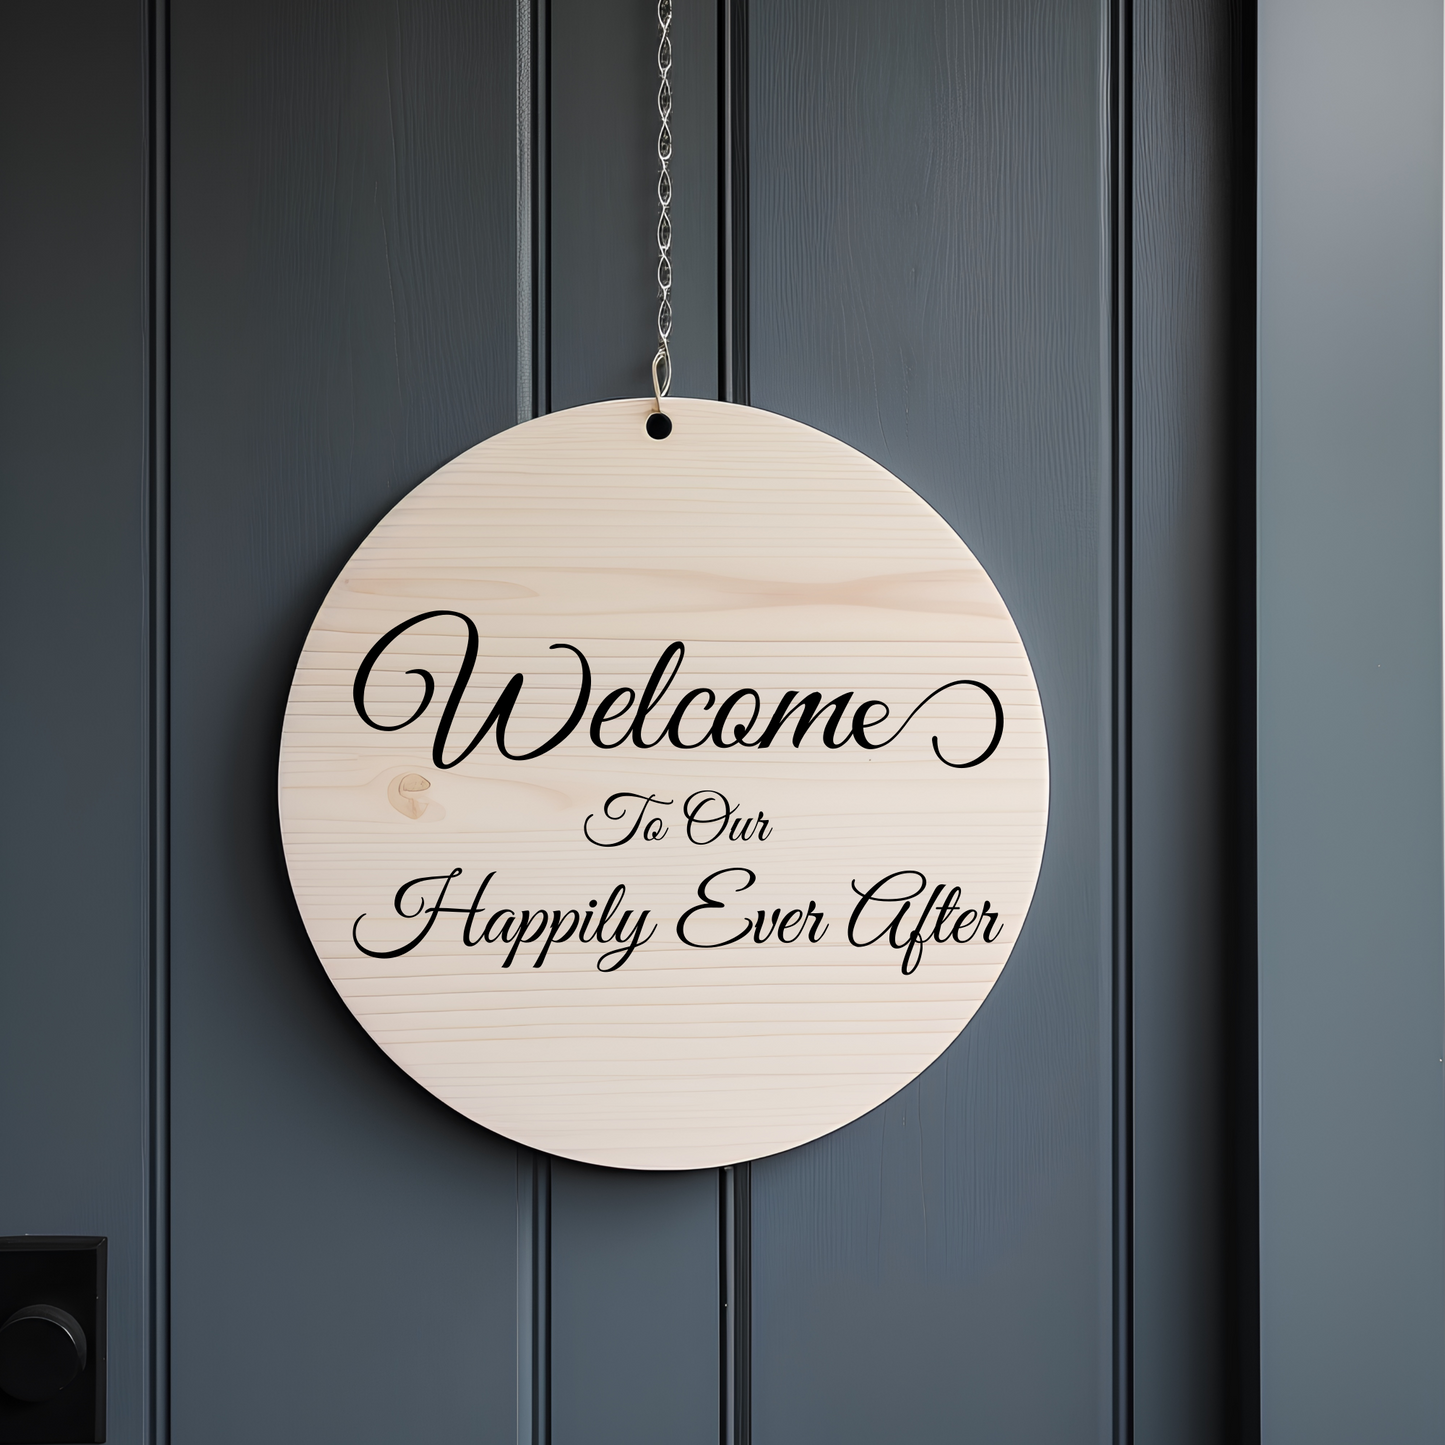 Welcome to our Happily Ever After Decal | Wedding Isle Decal